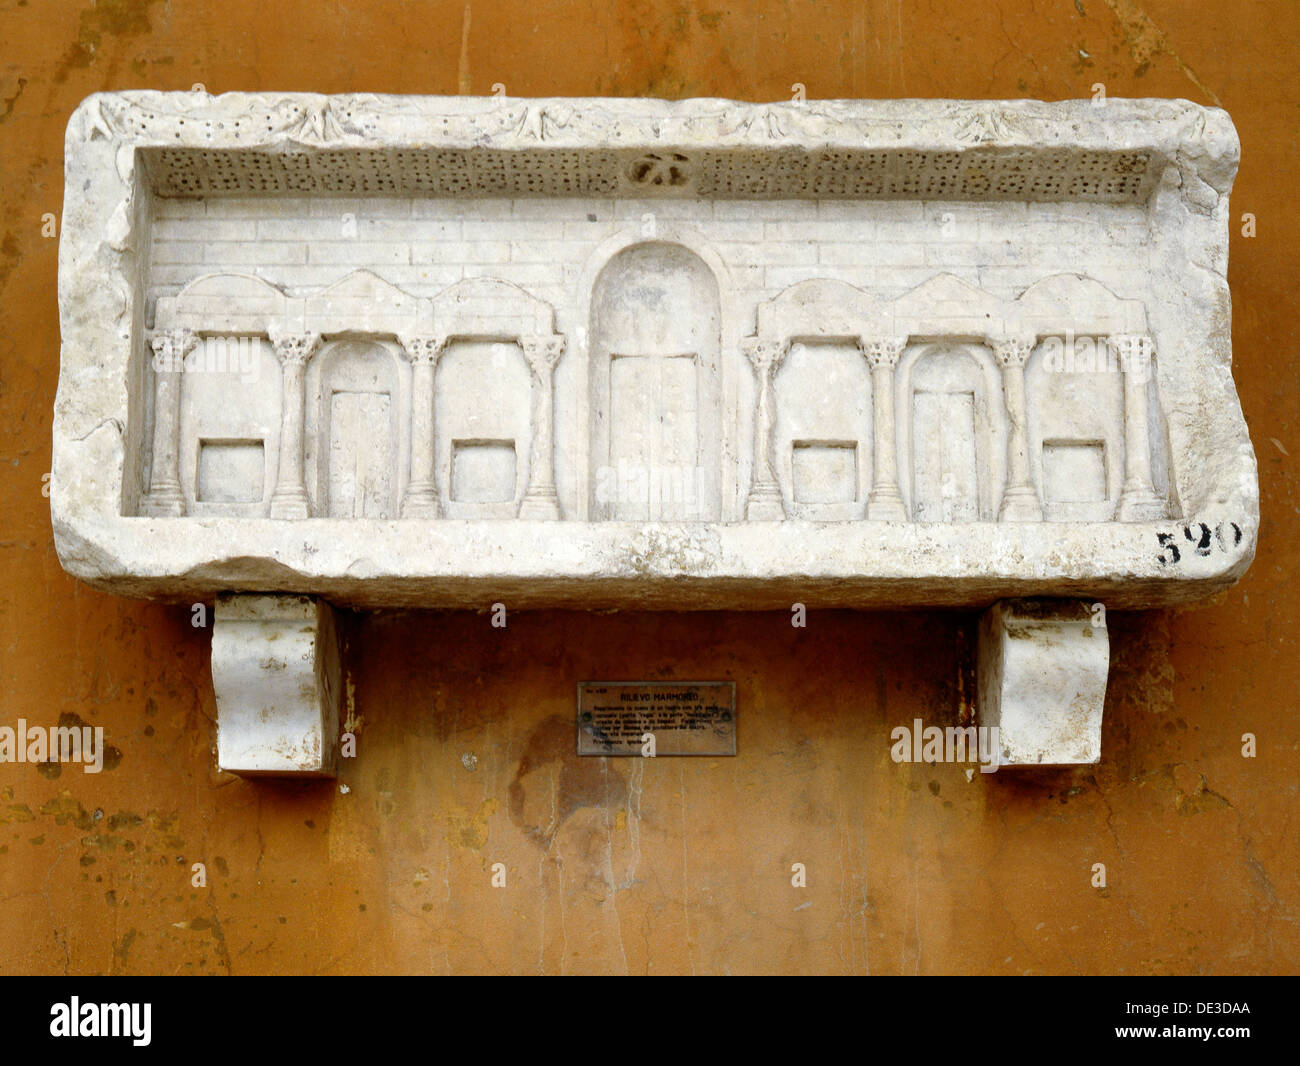 A model of 'scaenai frons' or stage of a theatre. Stock Photo